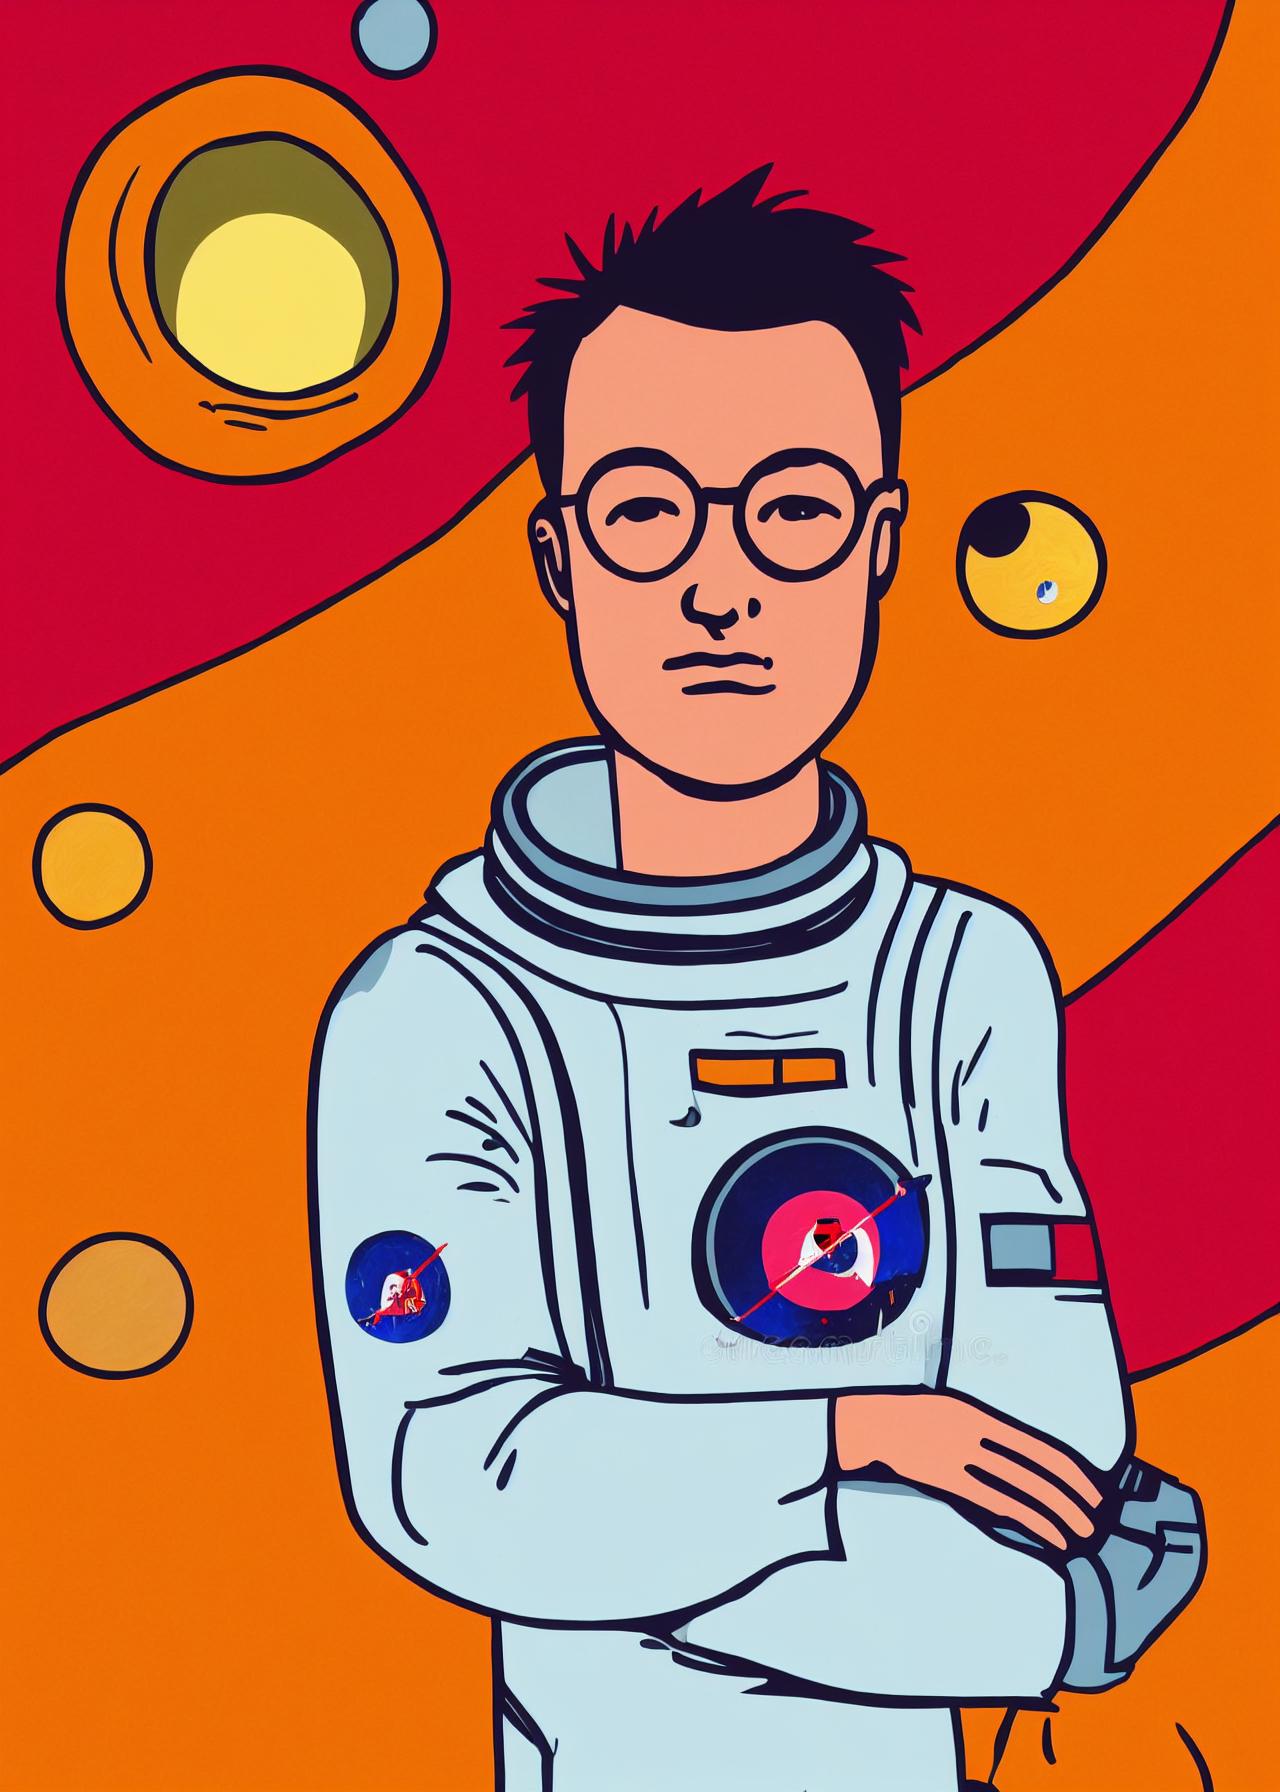 Artificial Intelligence (AI) generated image art, (...), ( ( dither ) ), portrait, editorial illustration young astronaut man in space, modern art deco, colorful